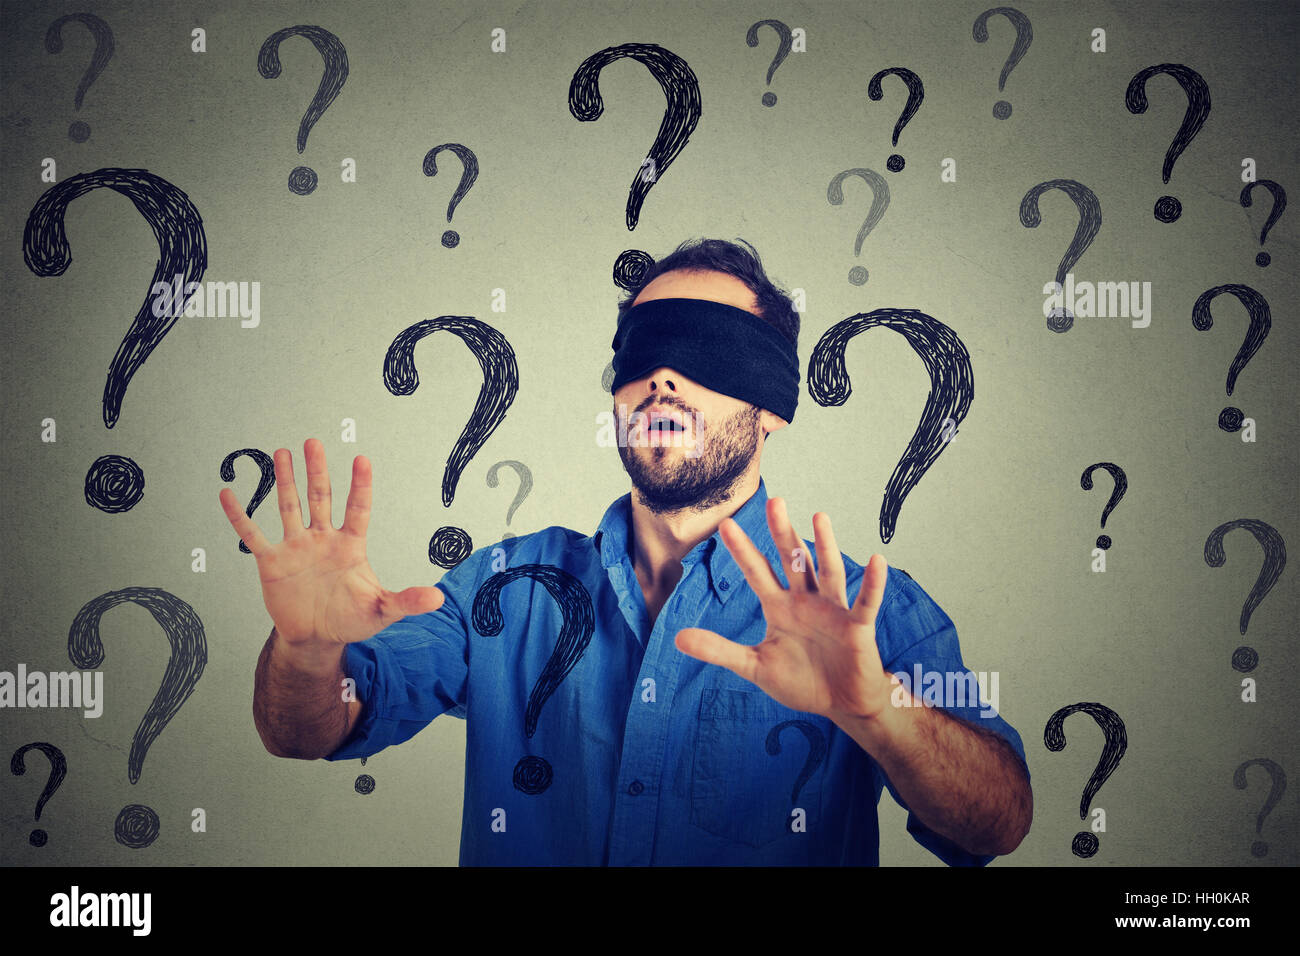 Portrait business man blindfolded stretching his arms out walking through many questions isolated on gray wall background Stock Photo